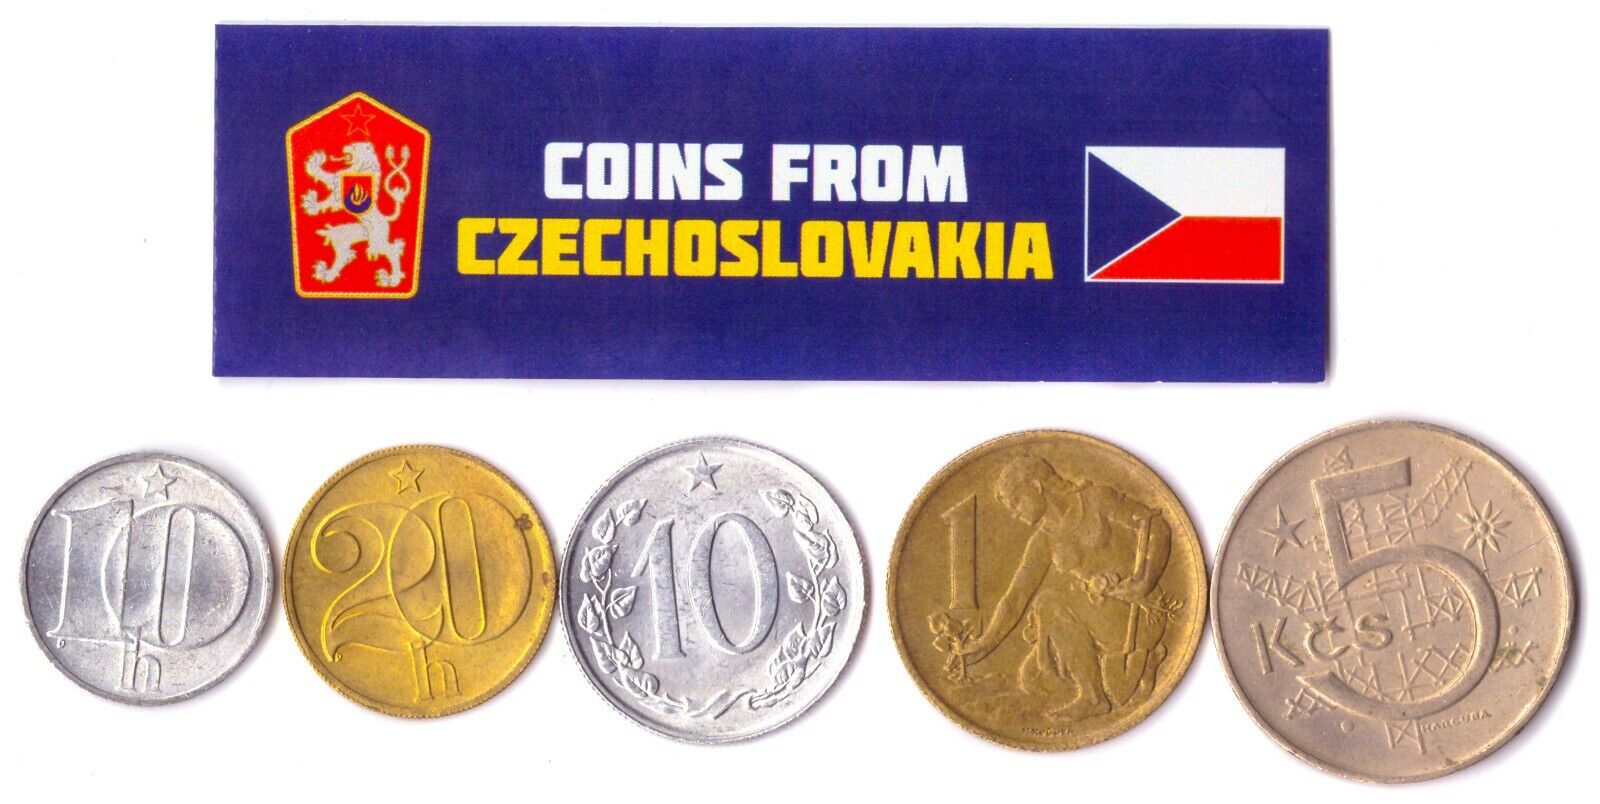 5 CZECHOSLOVAKIA COINS DIFFERENT EUROPEAN COINS FOREIGN CURRENCY, VALUABLE MONEY Без бренда - фотография #2